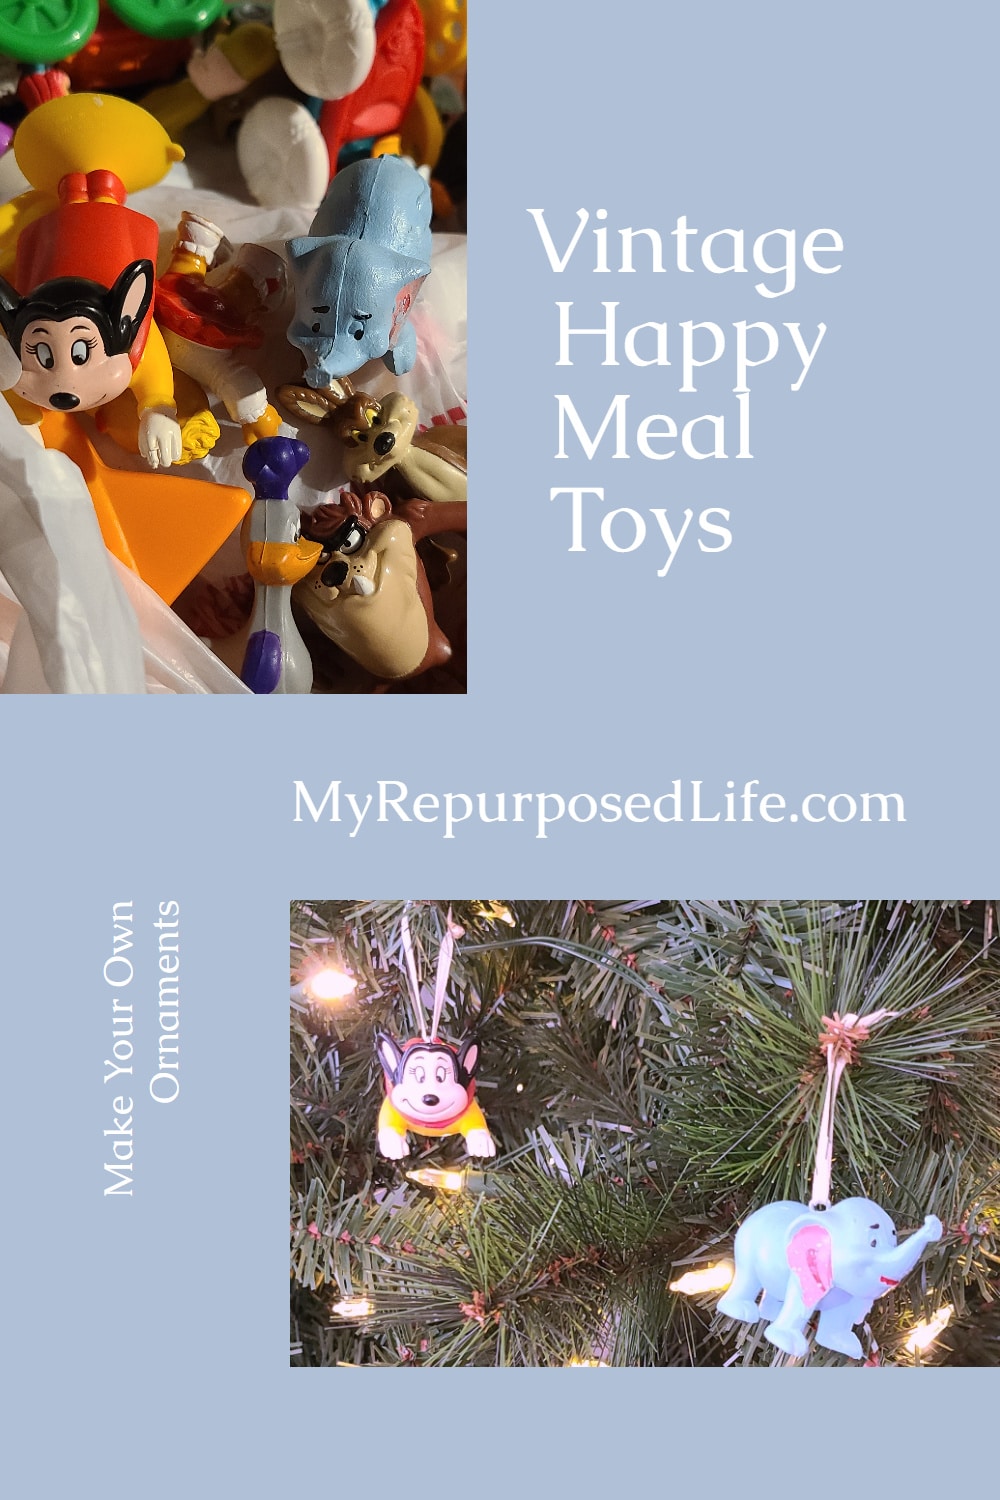 Easy project-how to make ornaments out of happy meal toys or your child's favorite action figures. Step by step directions to make your own today! #MyRepurposedLife #repurposed #happymealtoys #actionfigures #playset #diy #ornaments via @repurposedlife